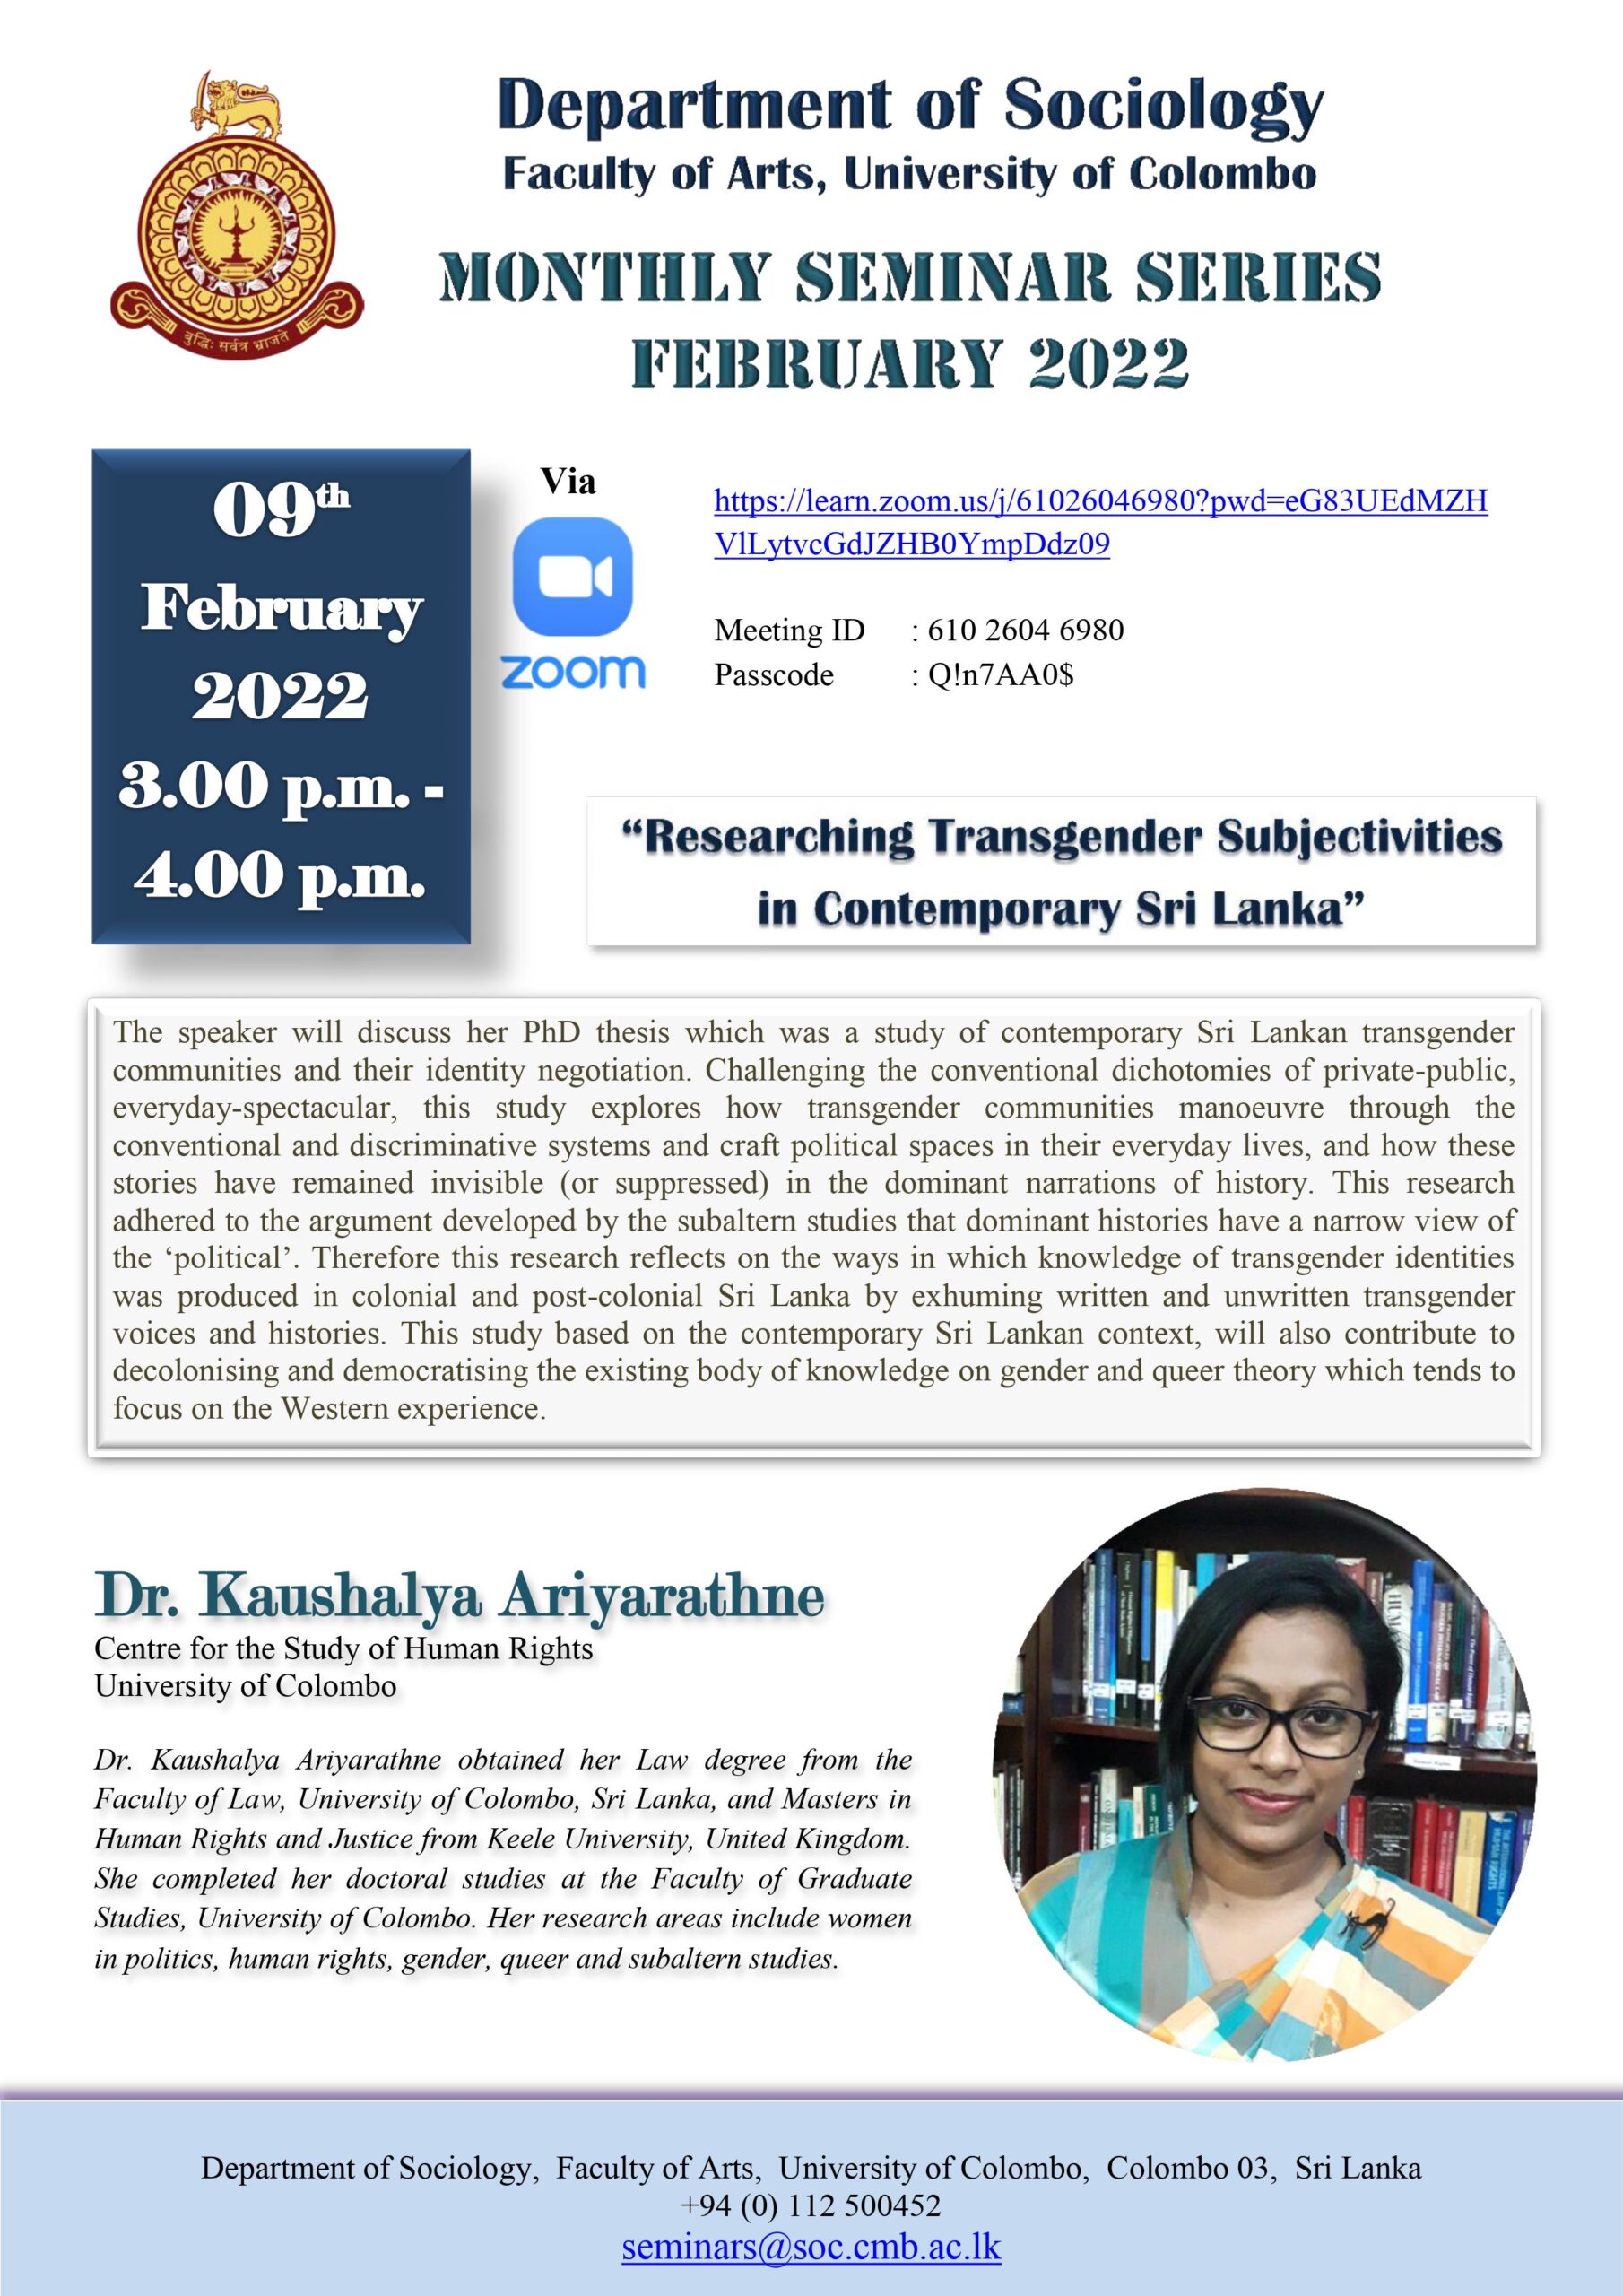 Department of Sociology Monthly Seminar Series – 09th Feb.